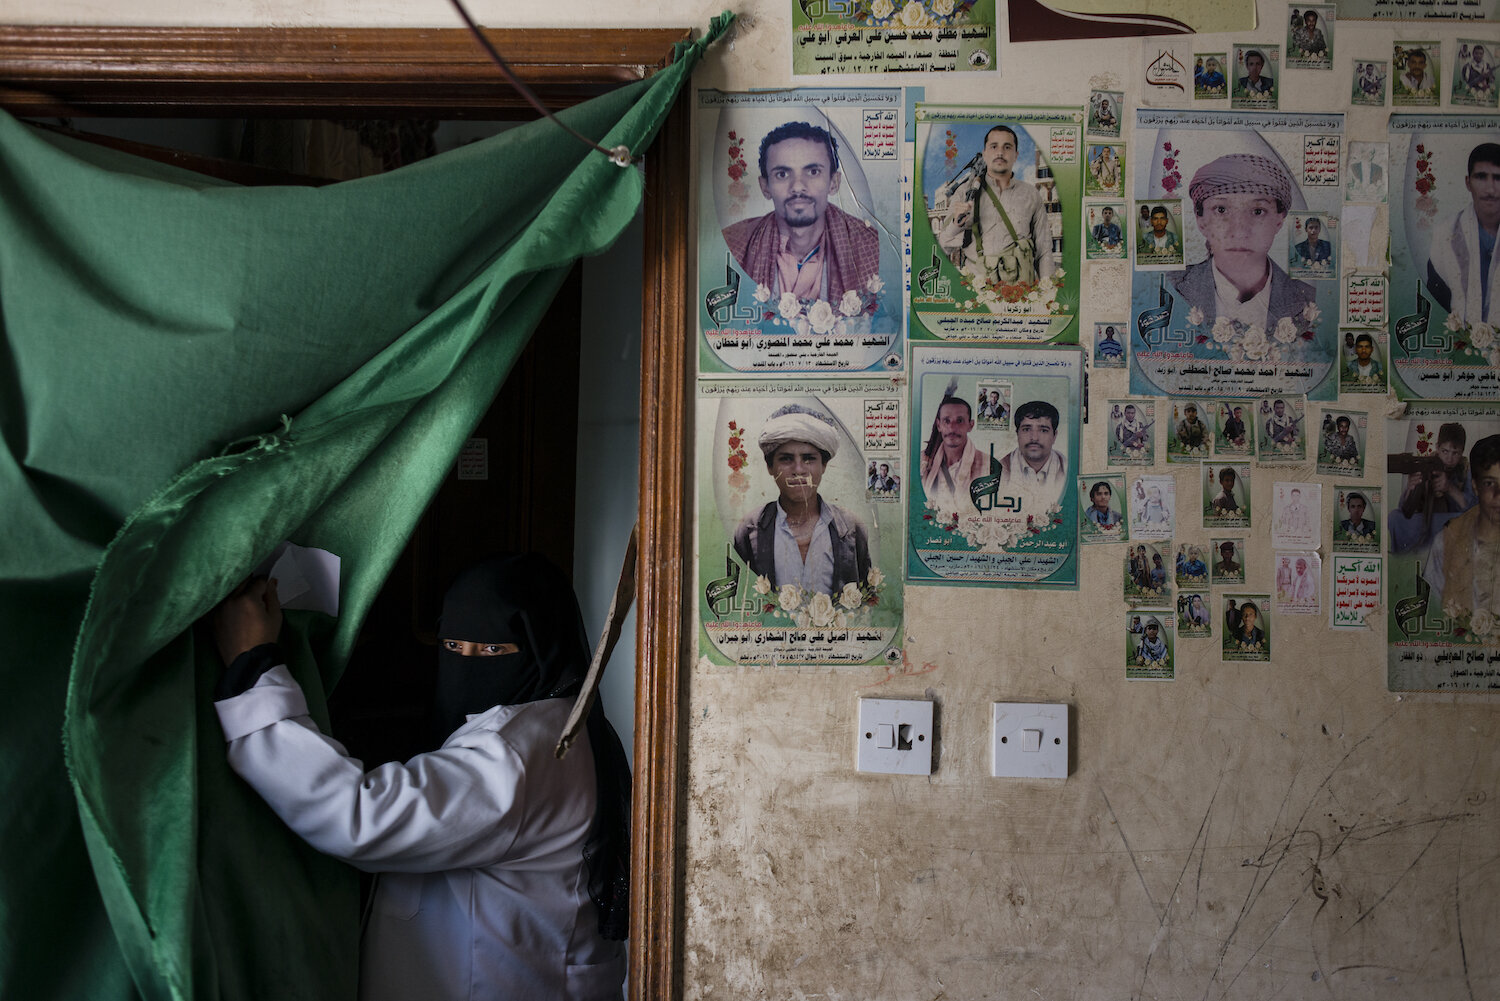  A nurse retrieves supplies at the malnutrition center supported by WHO on May 7, 2018 in Bani Mansur, Yemen. Photos of Houthi martyrs hang on the walls. 